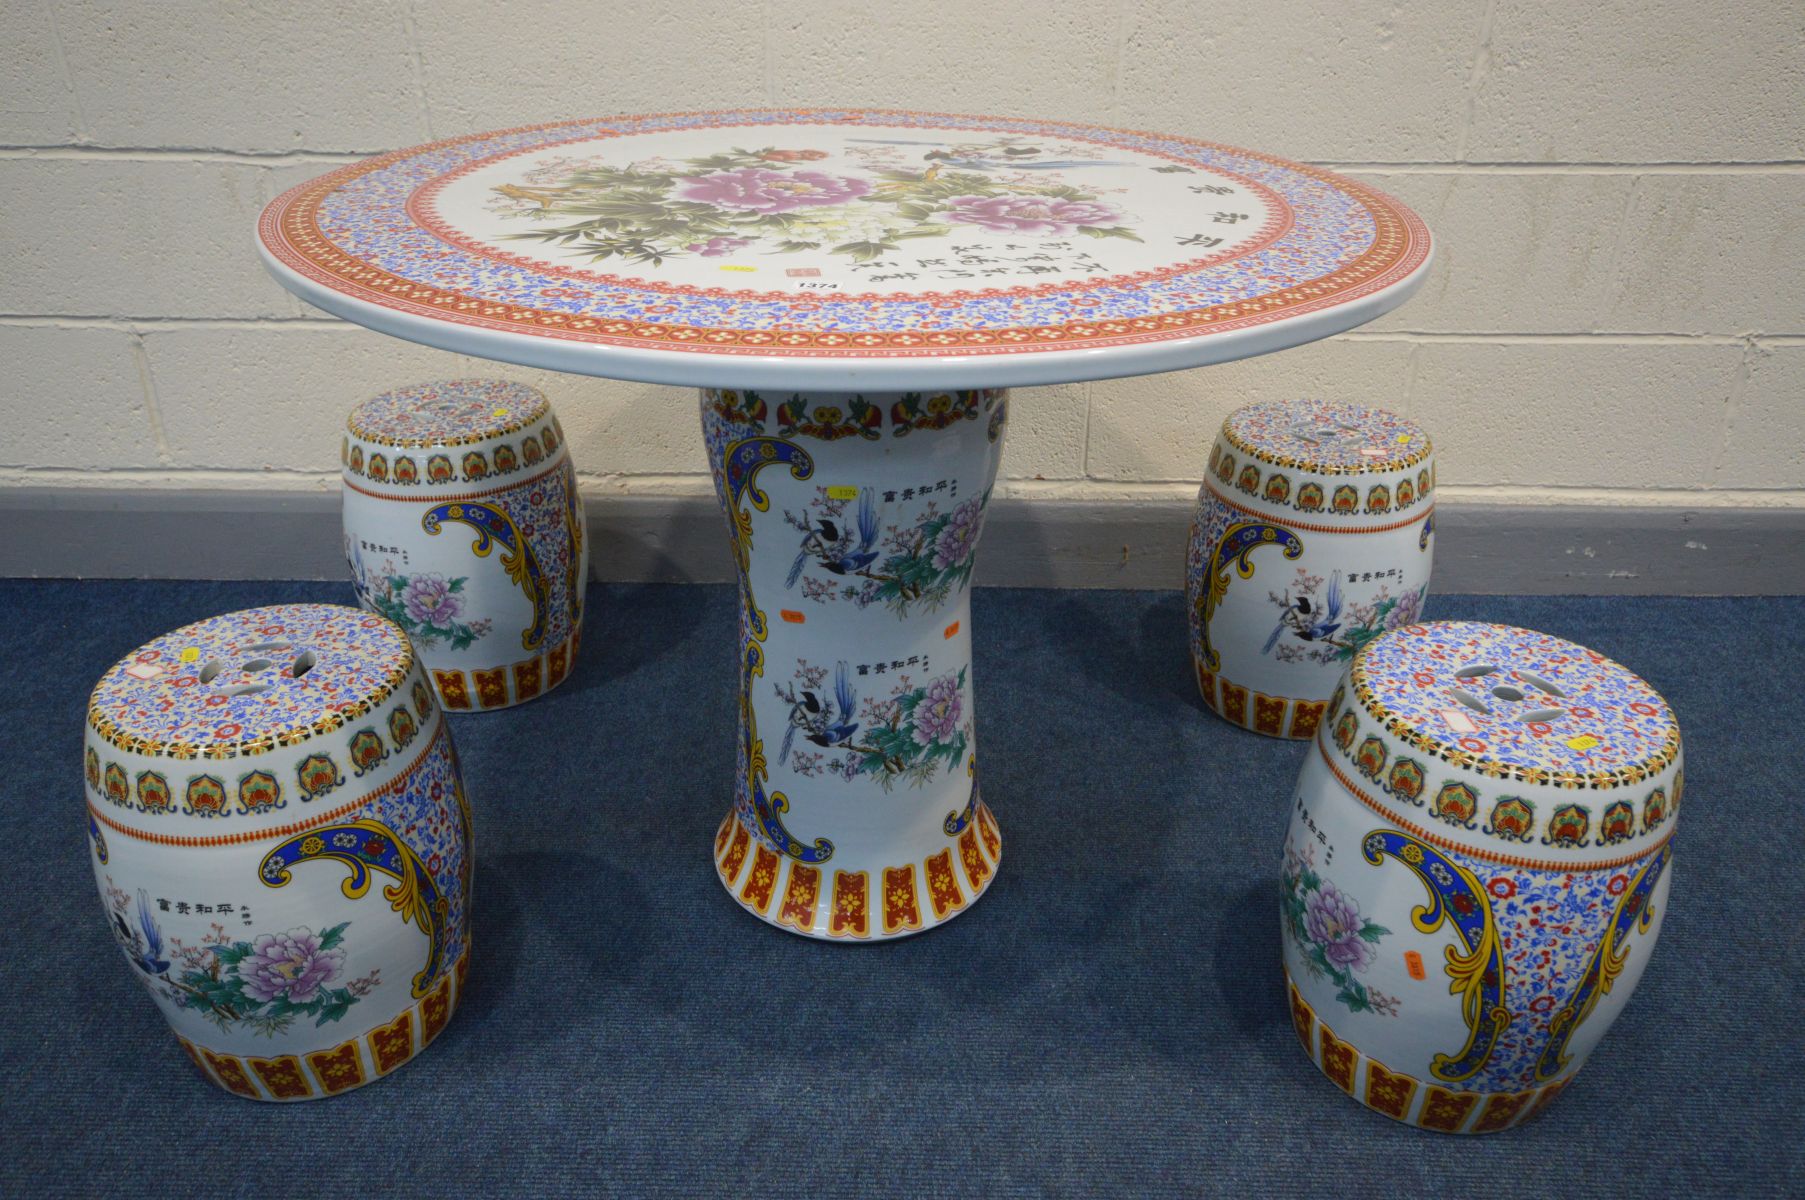 AN ORIENTAL PORCELAIN CIRCULAR TABLE, on a pedestal base, with chinoiserie decoration and majority